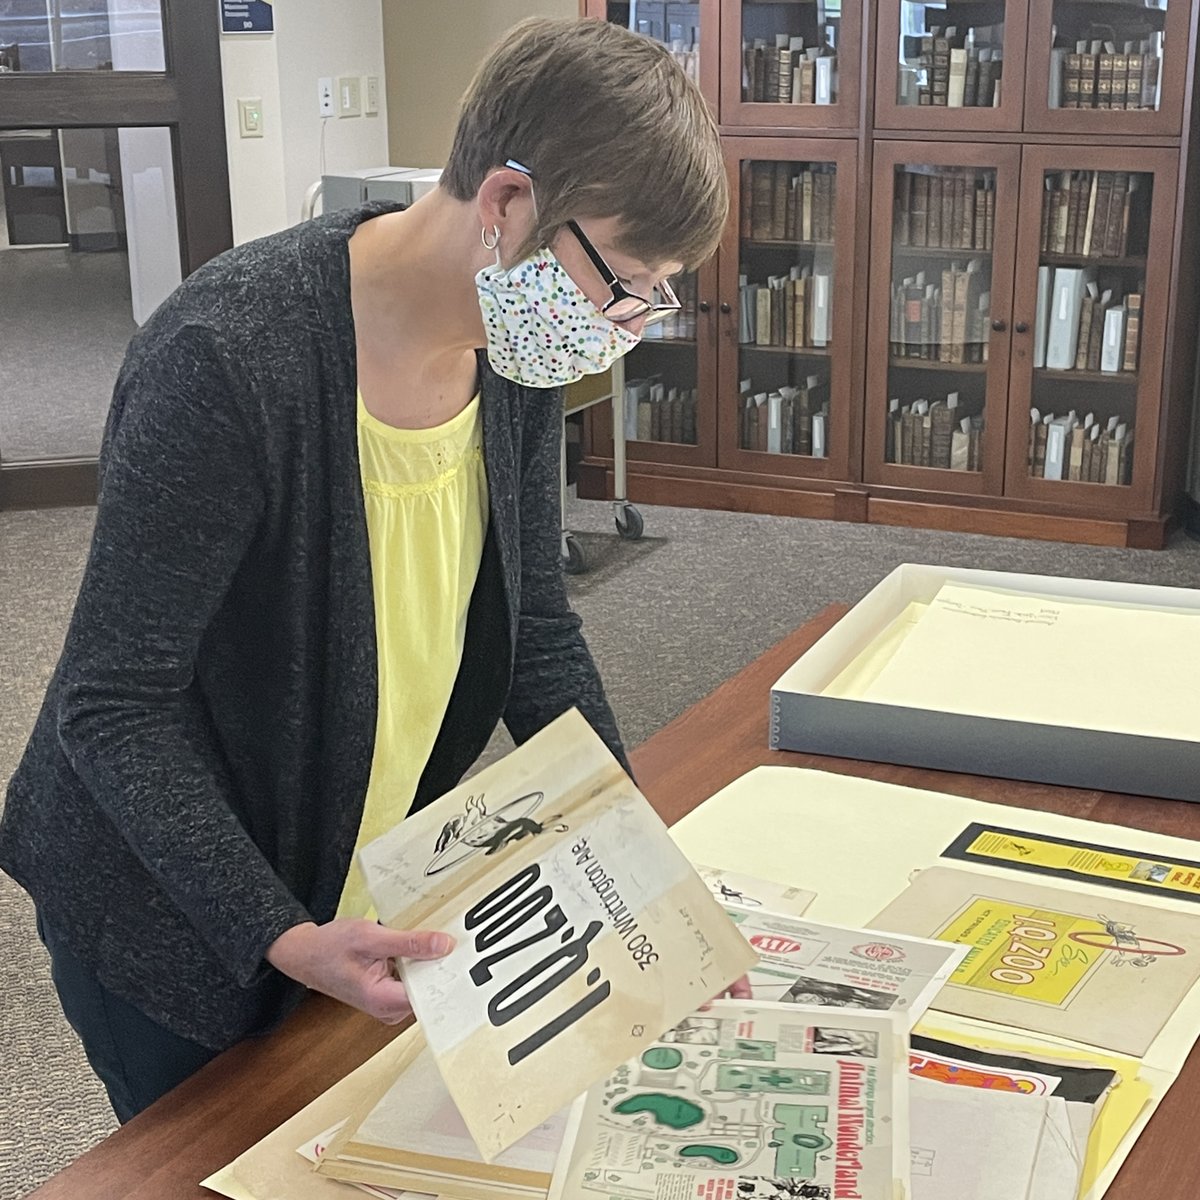 It’s #AskAnArchivist Day! In honor of the occasion, Reference Archivist Lizette Royer Barton will be taking over our account today to answer all your questions about archives and special collections. Hit us with your nerdiest, obscurest, most mysterious inquiries! 🤔 #HistPsych